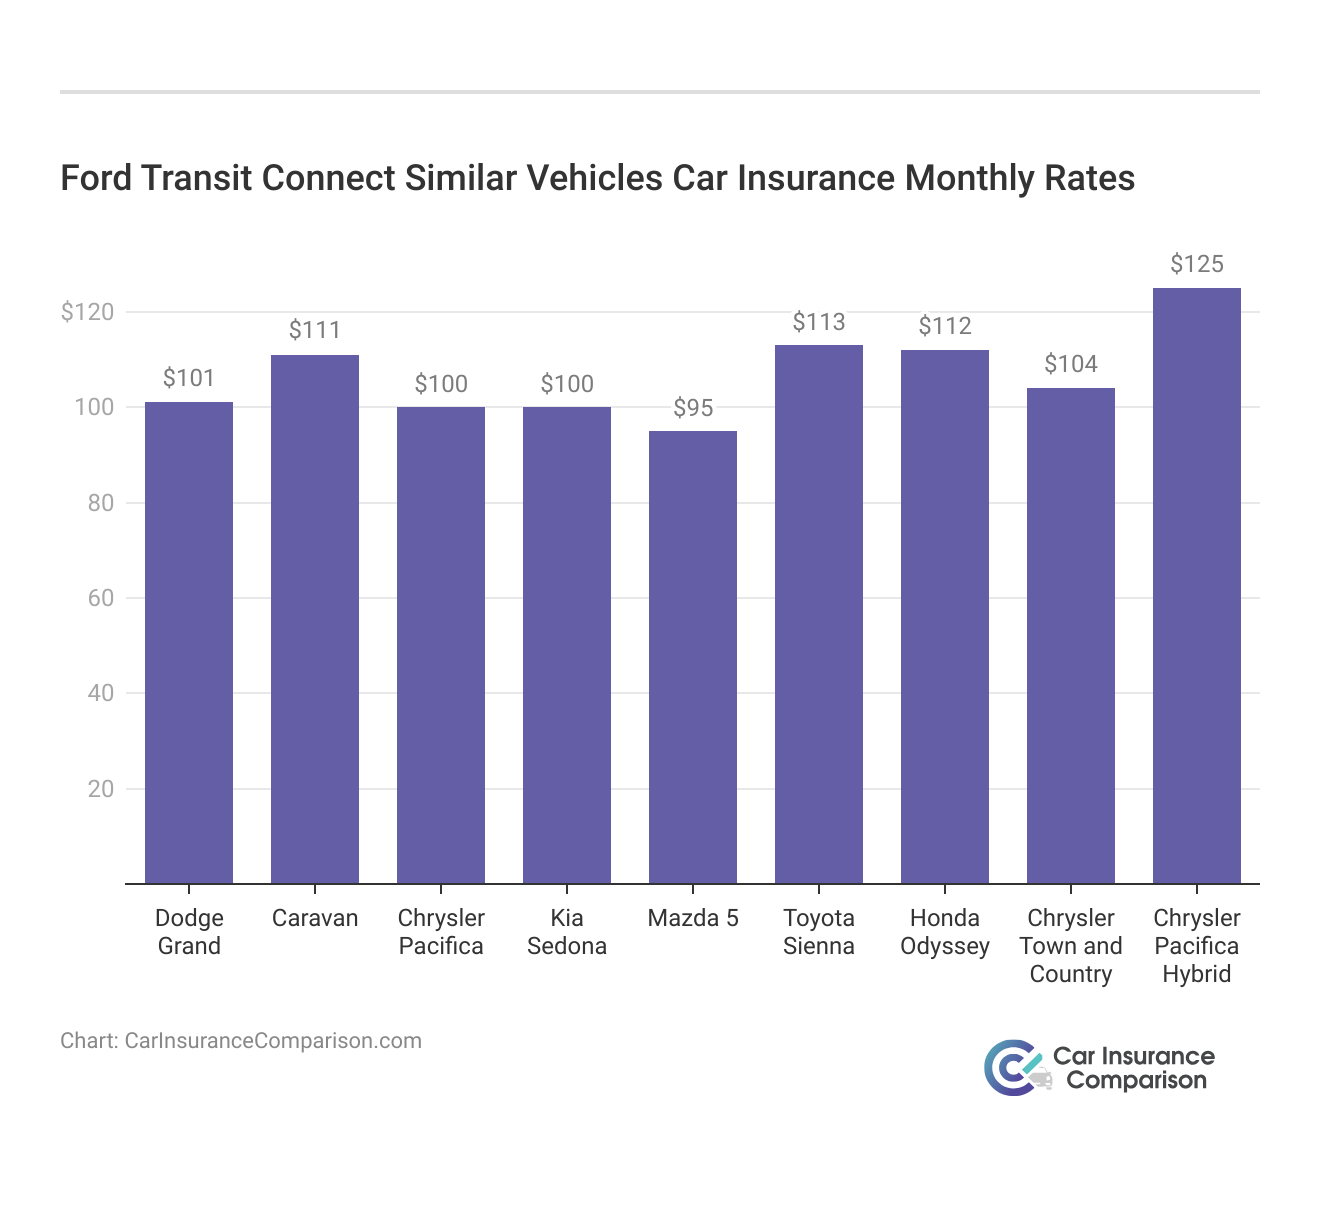 <h3>Ford Transit Connect Similar Vehicles Car Insurance Monthly Rates</h3>